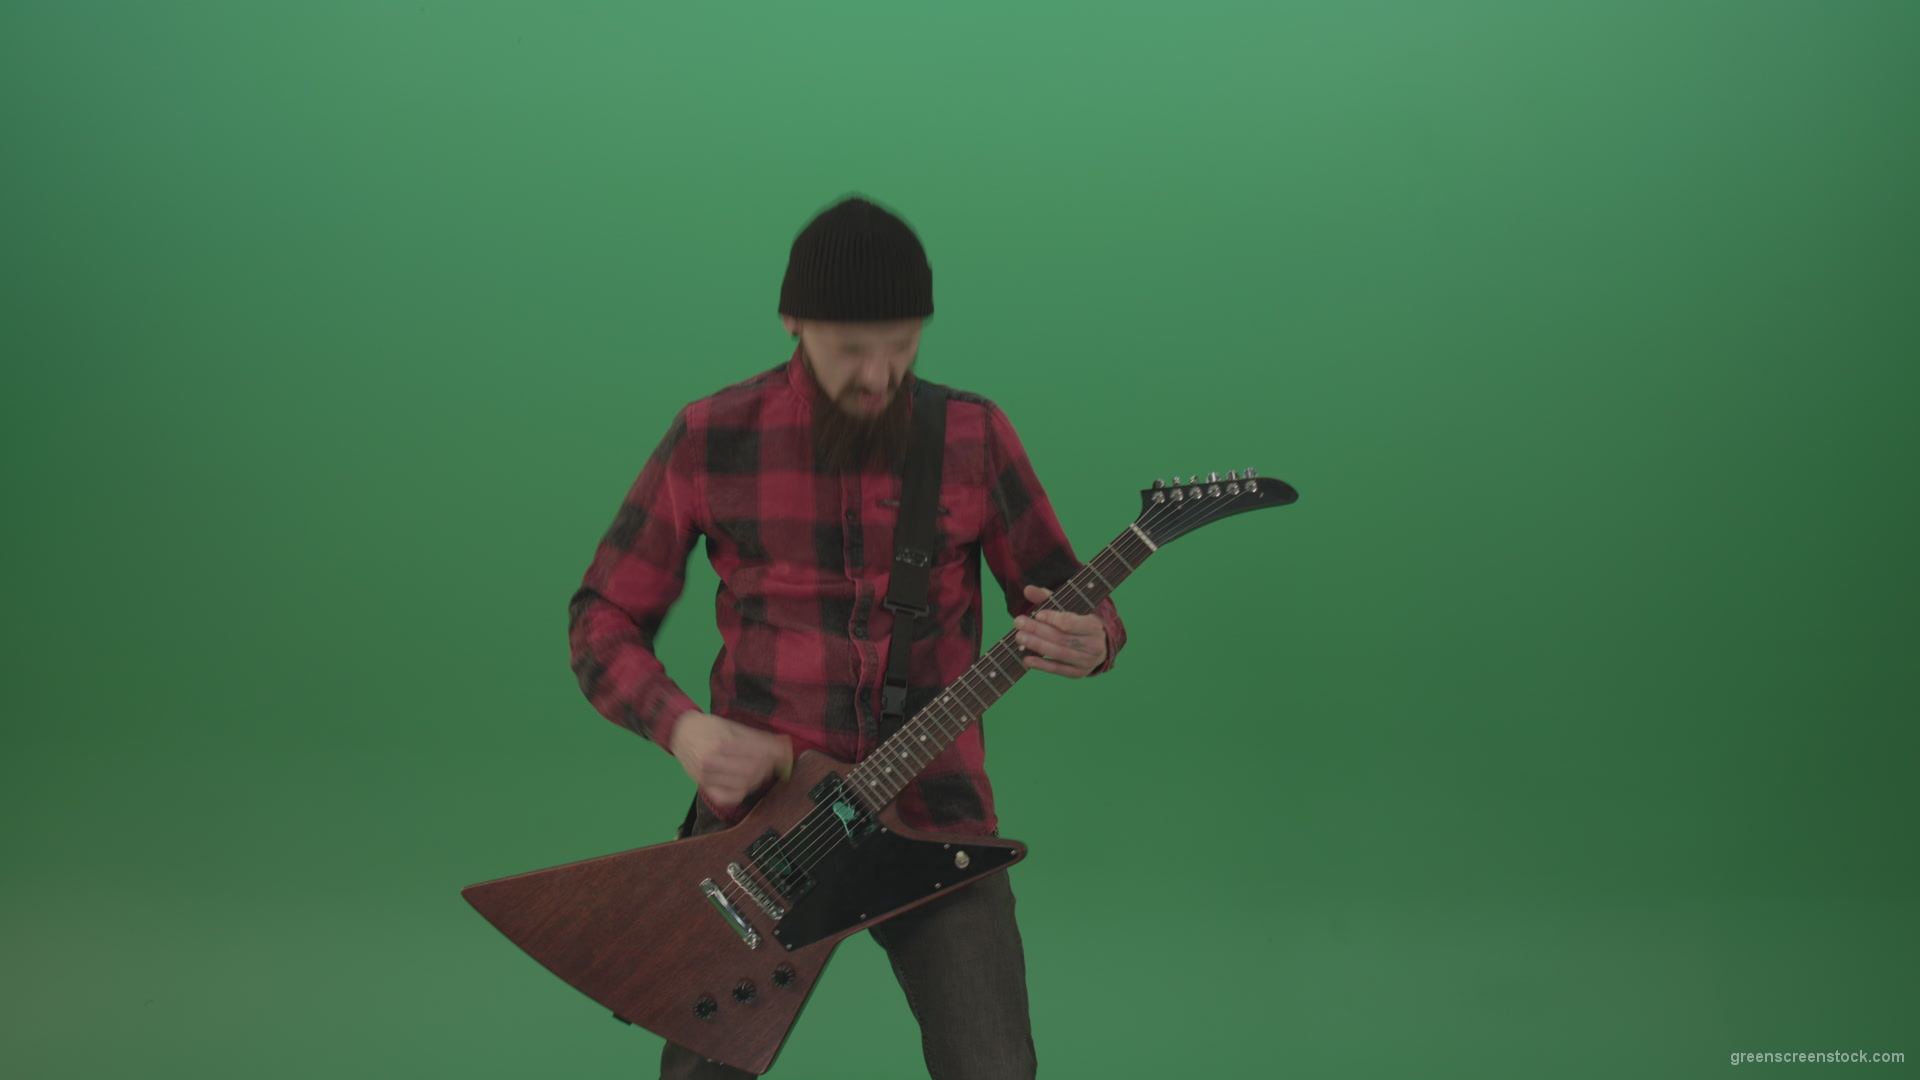 Old-man-with-beard-play-rock-guitar-isolated-on-green-screen-background-4K_006 Green Screen Stock